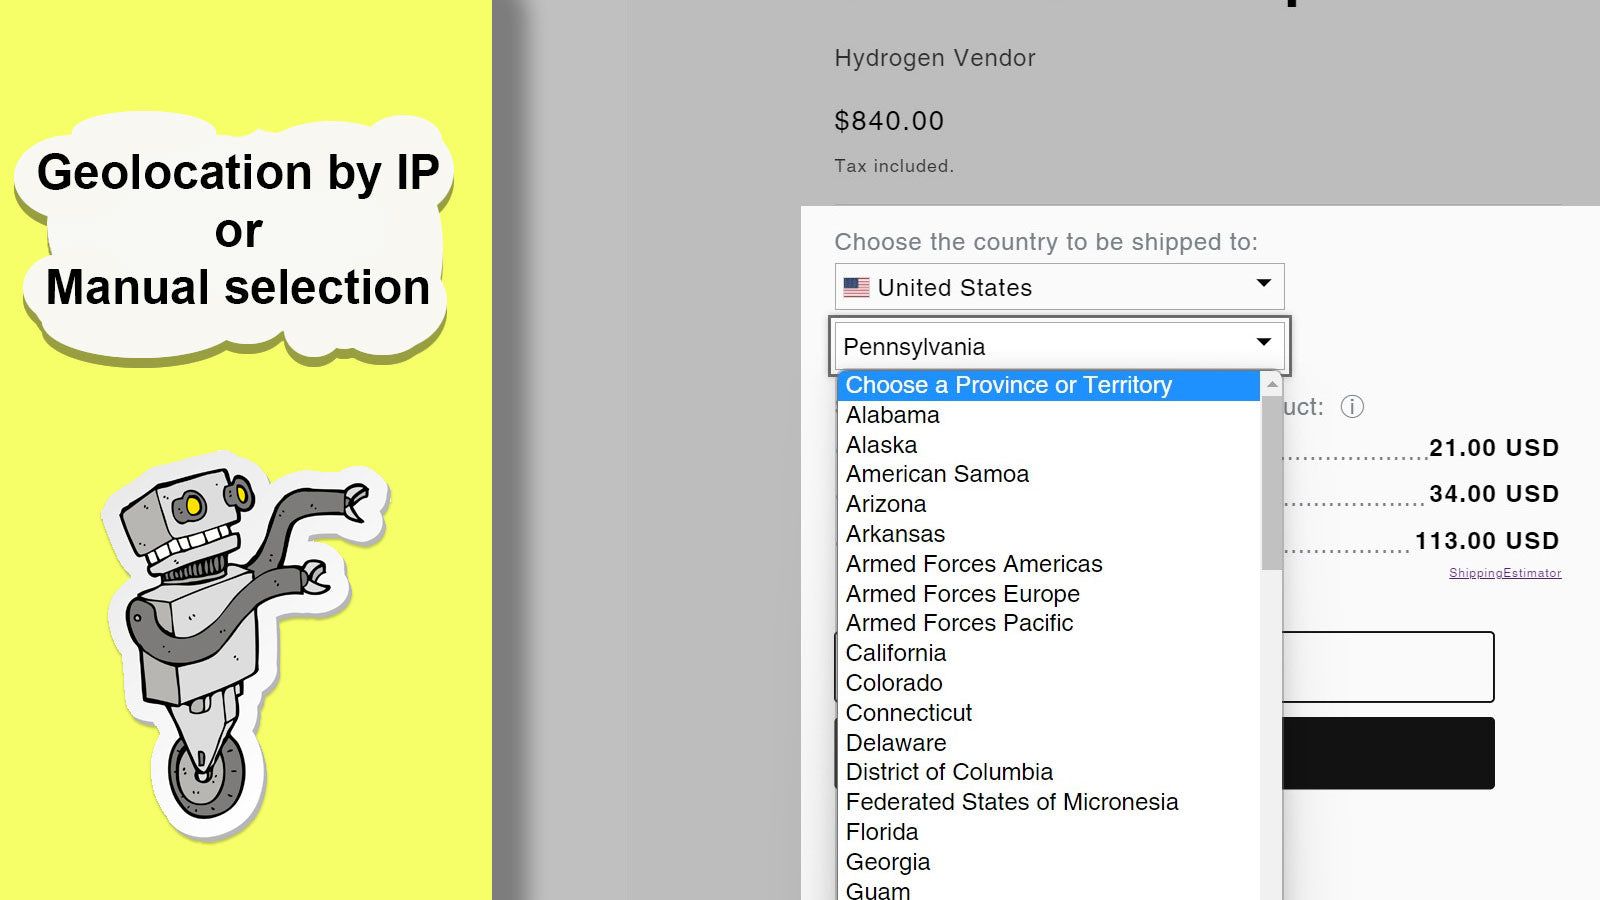 IP Geolocation or manual destination selection